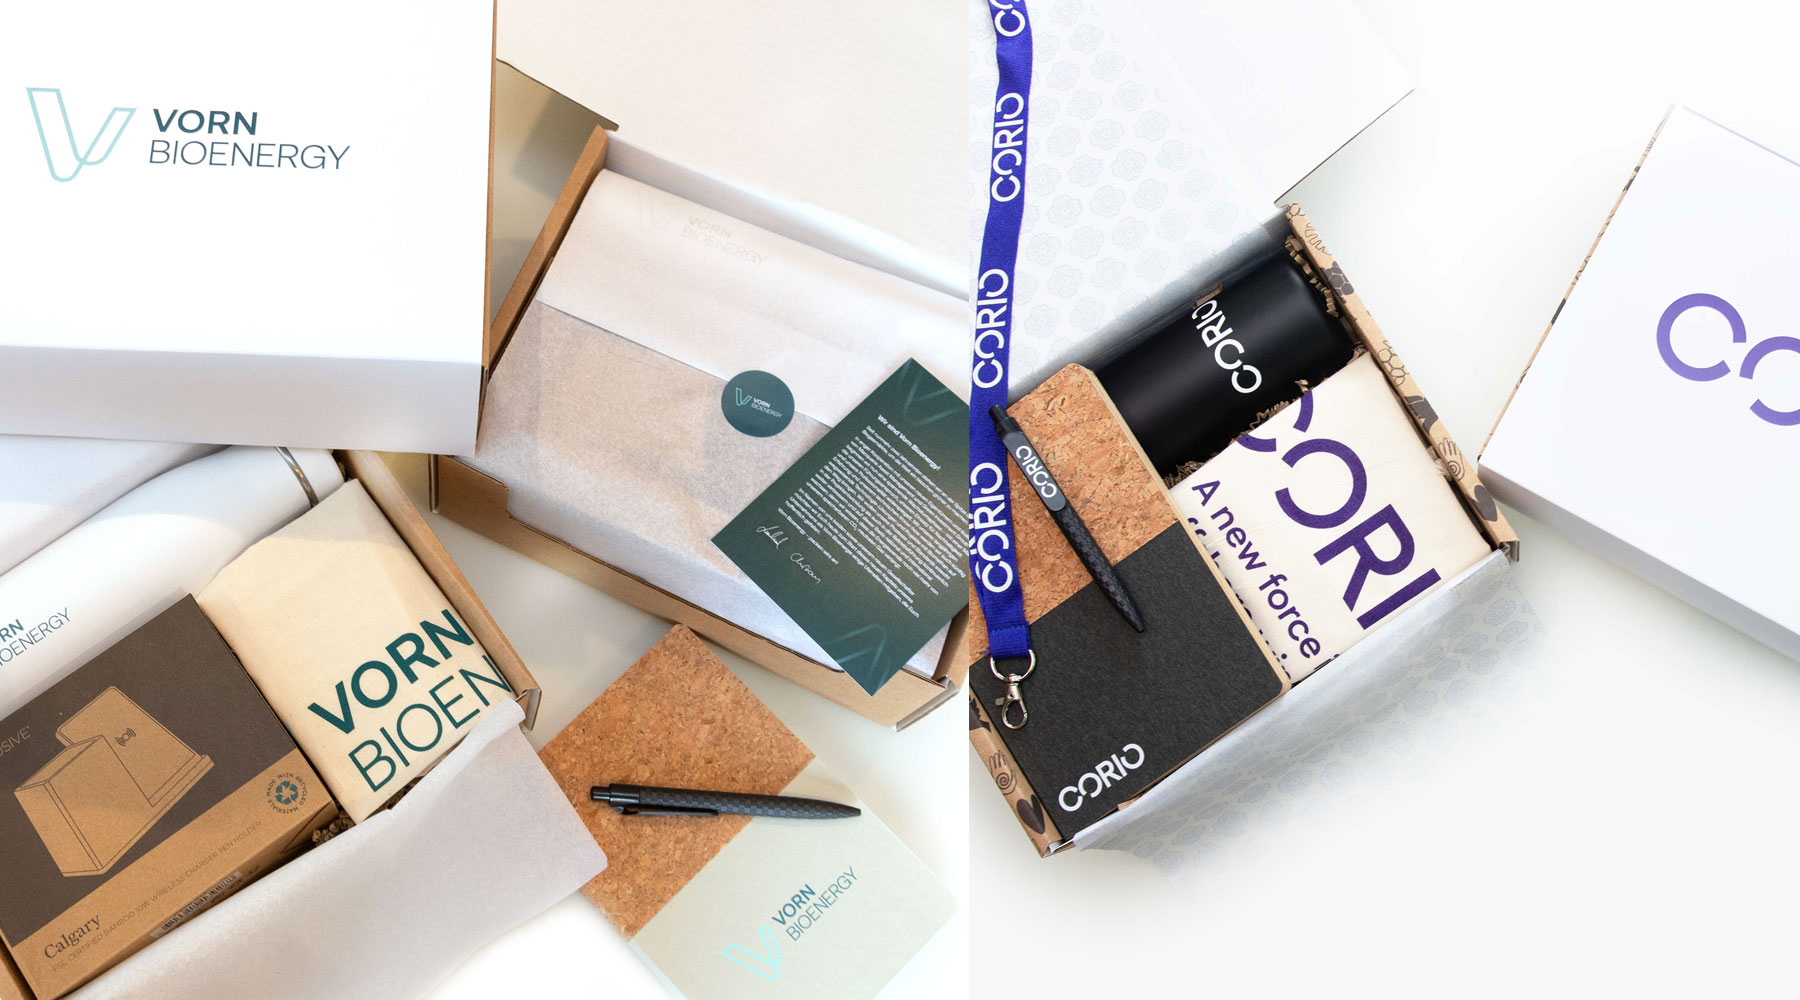 Sustainable corporate gift boxes with a selection of personalised stationery and lifestyle items